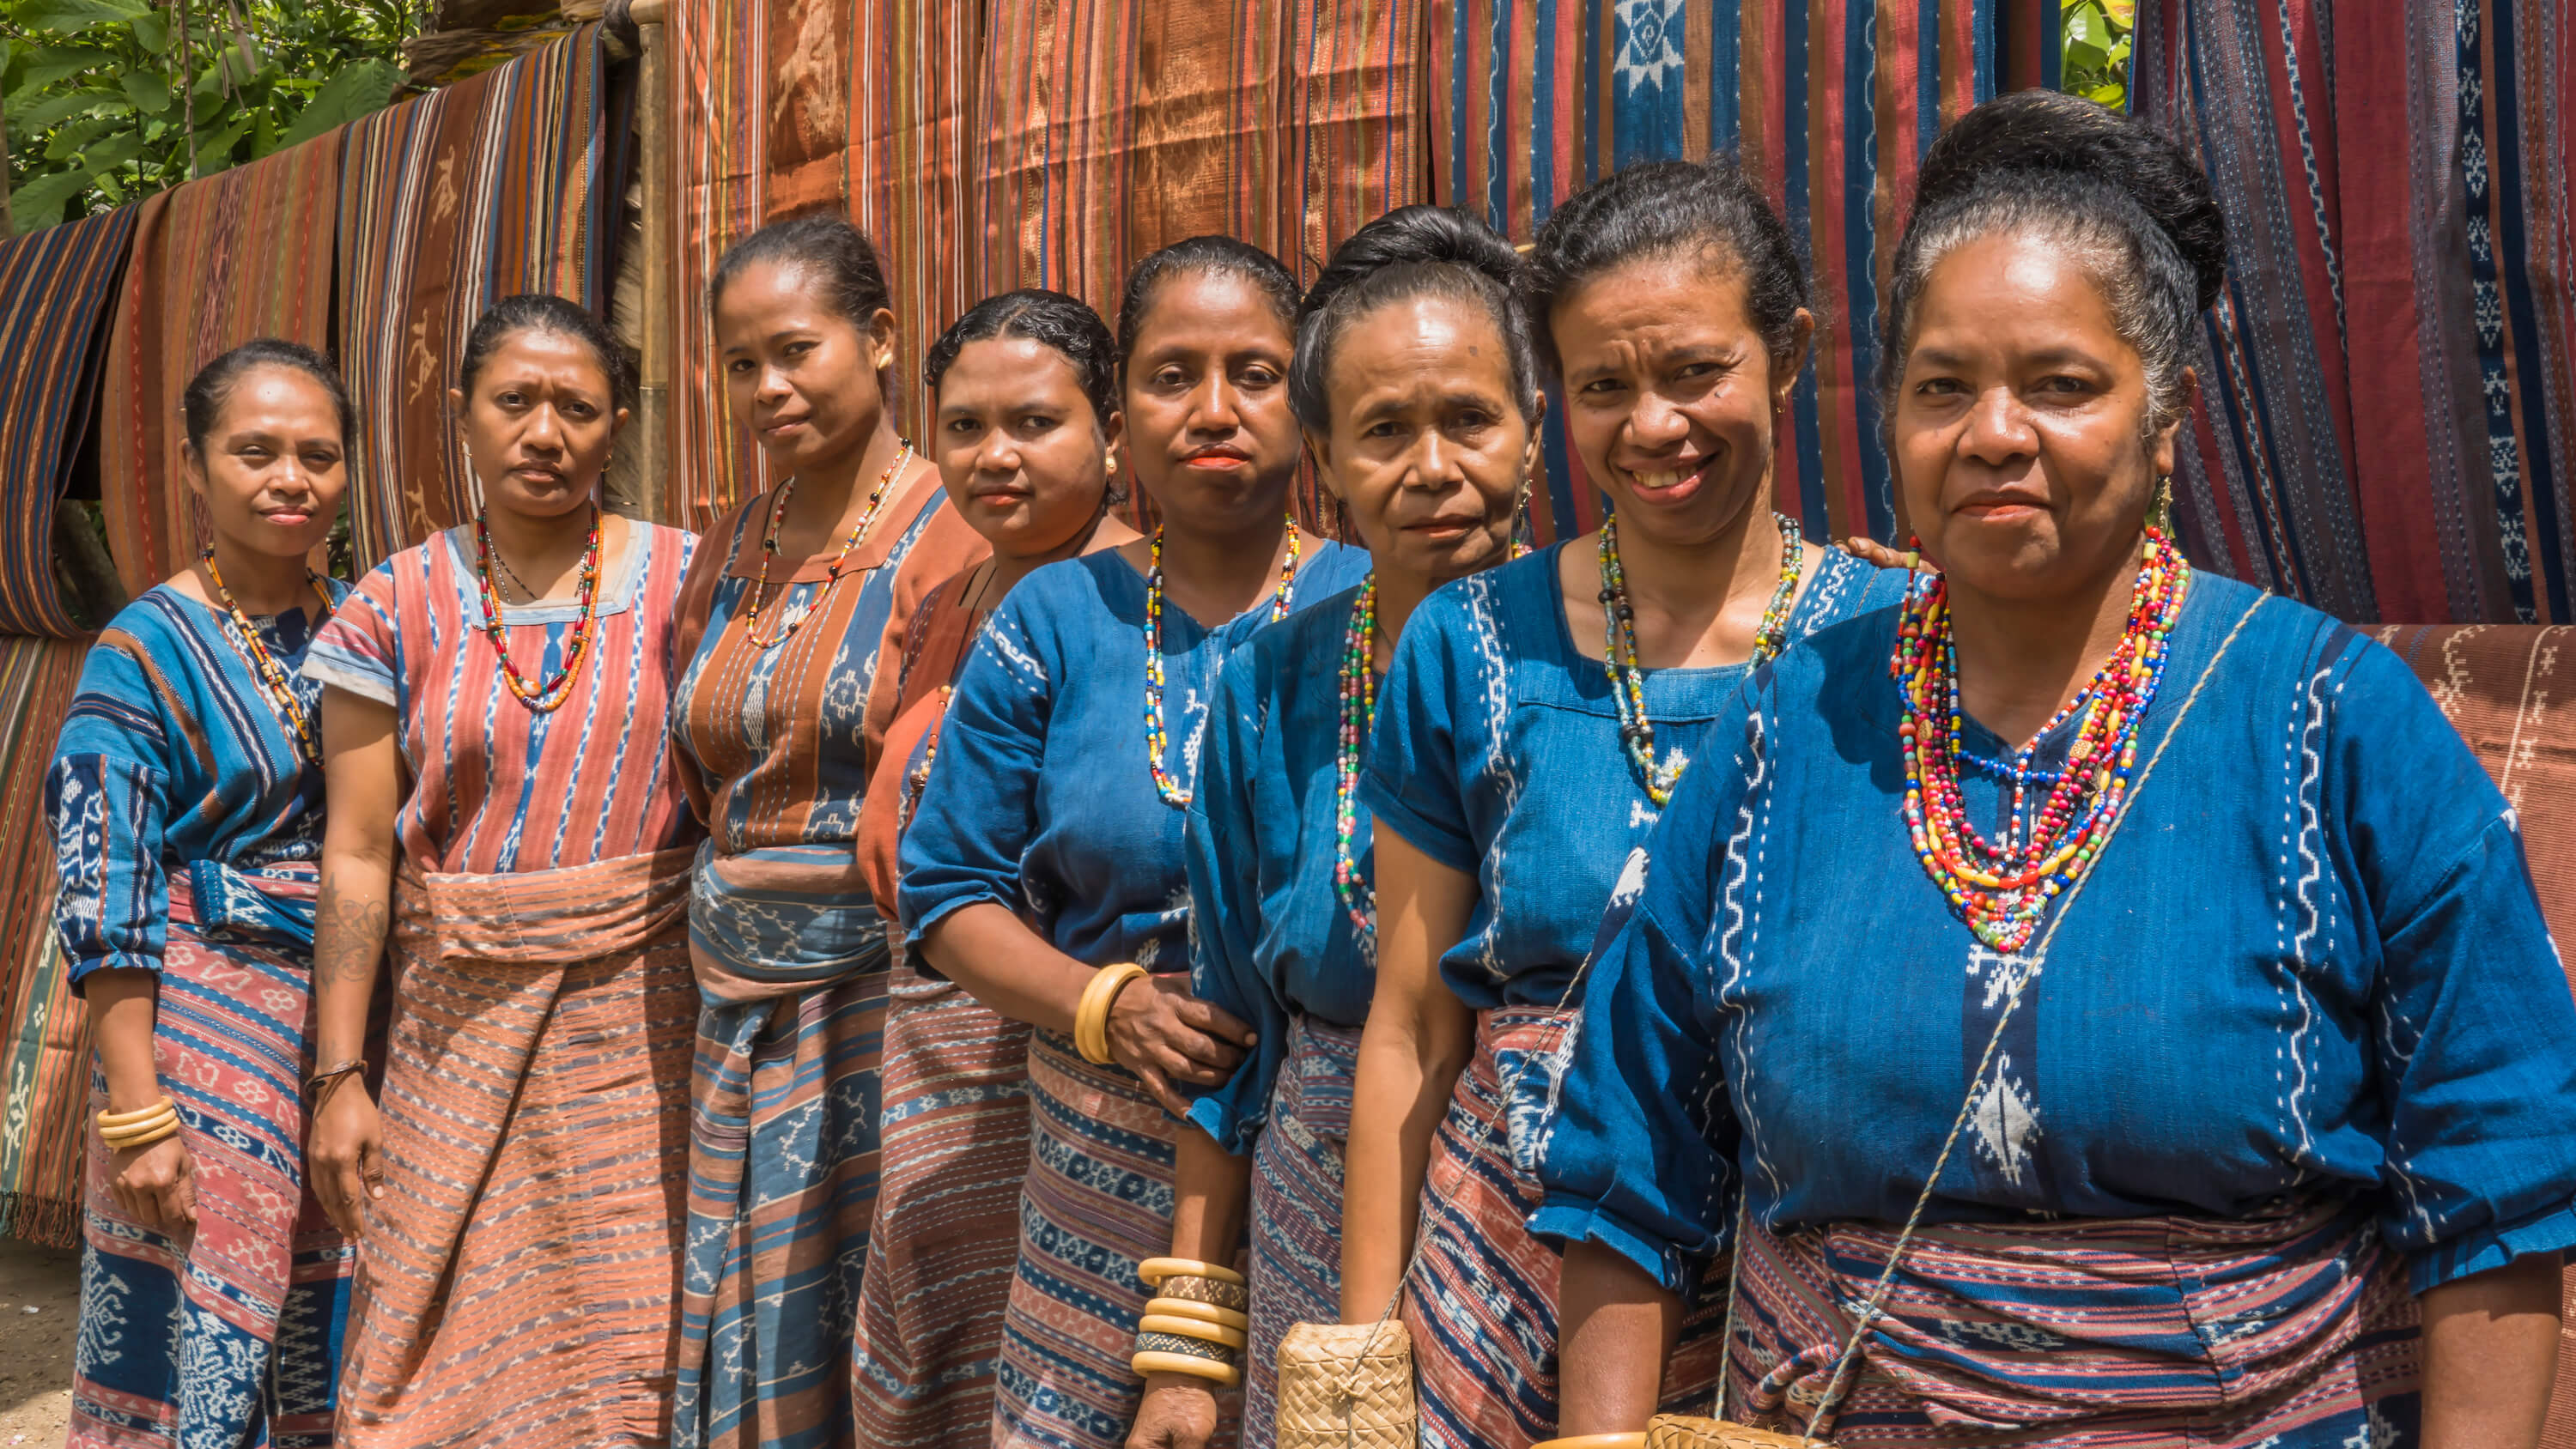 Members of Watubo stand before their woven creations: (left to right) Maria Genisa, Rosvita Sensiana, Maria Elviana, Maria Suwanti, Nona Eta, Maria Roslina, Maria Goreti and Virgensia Nurak. The workshop is designed to immerse travellers in Sikka’s weaving heritage. Photo by Andra Fembriarto